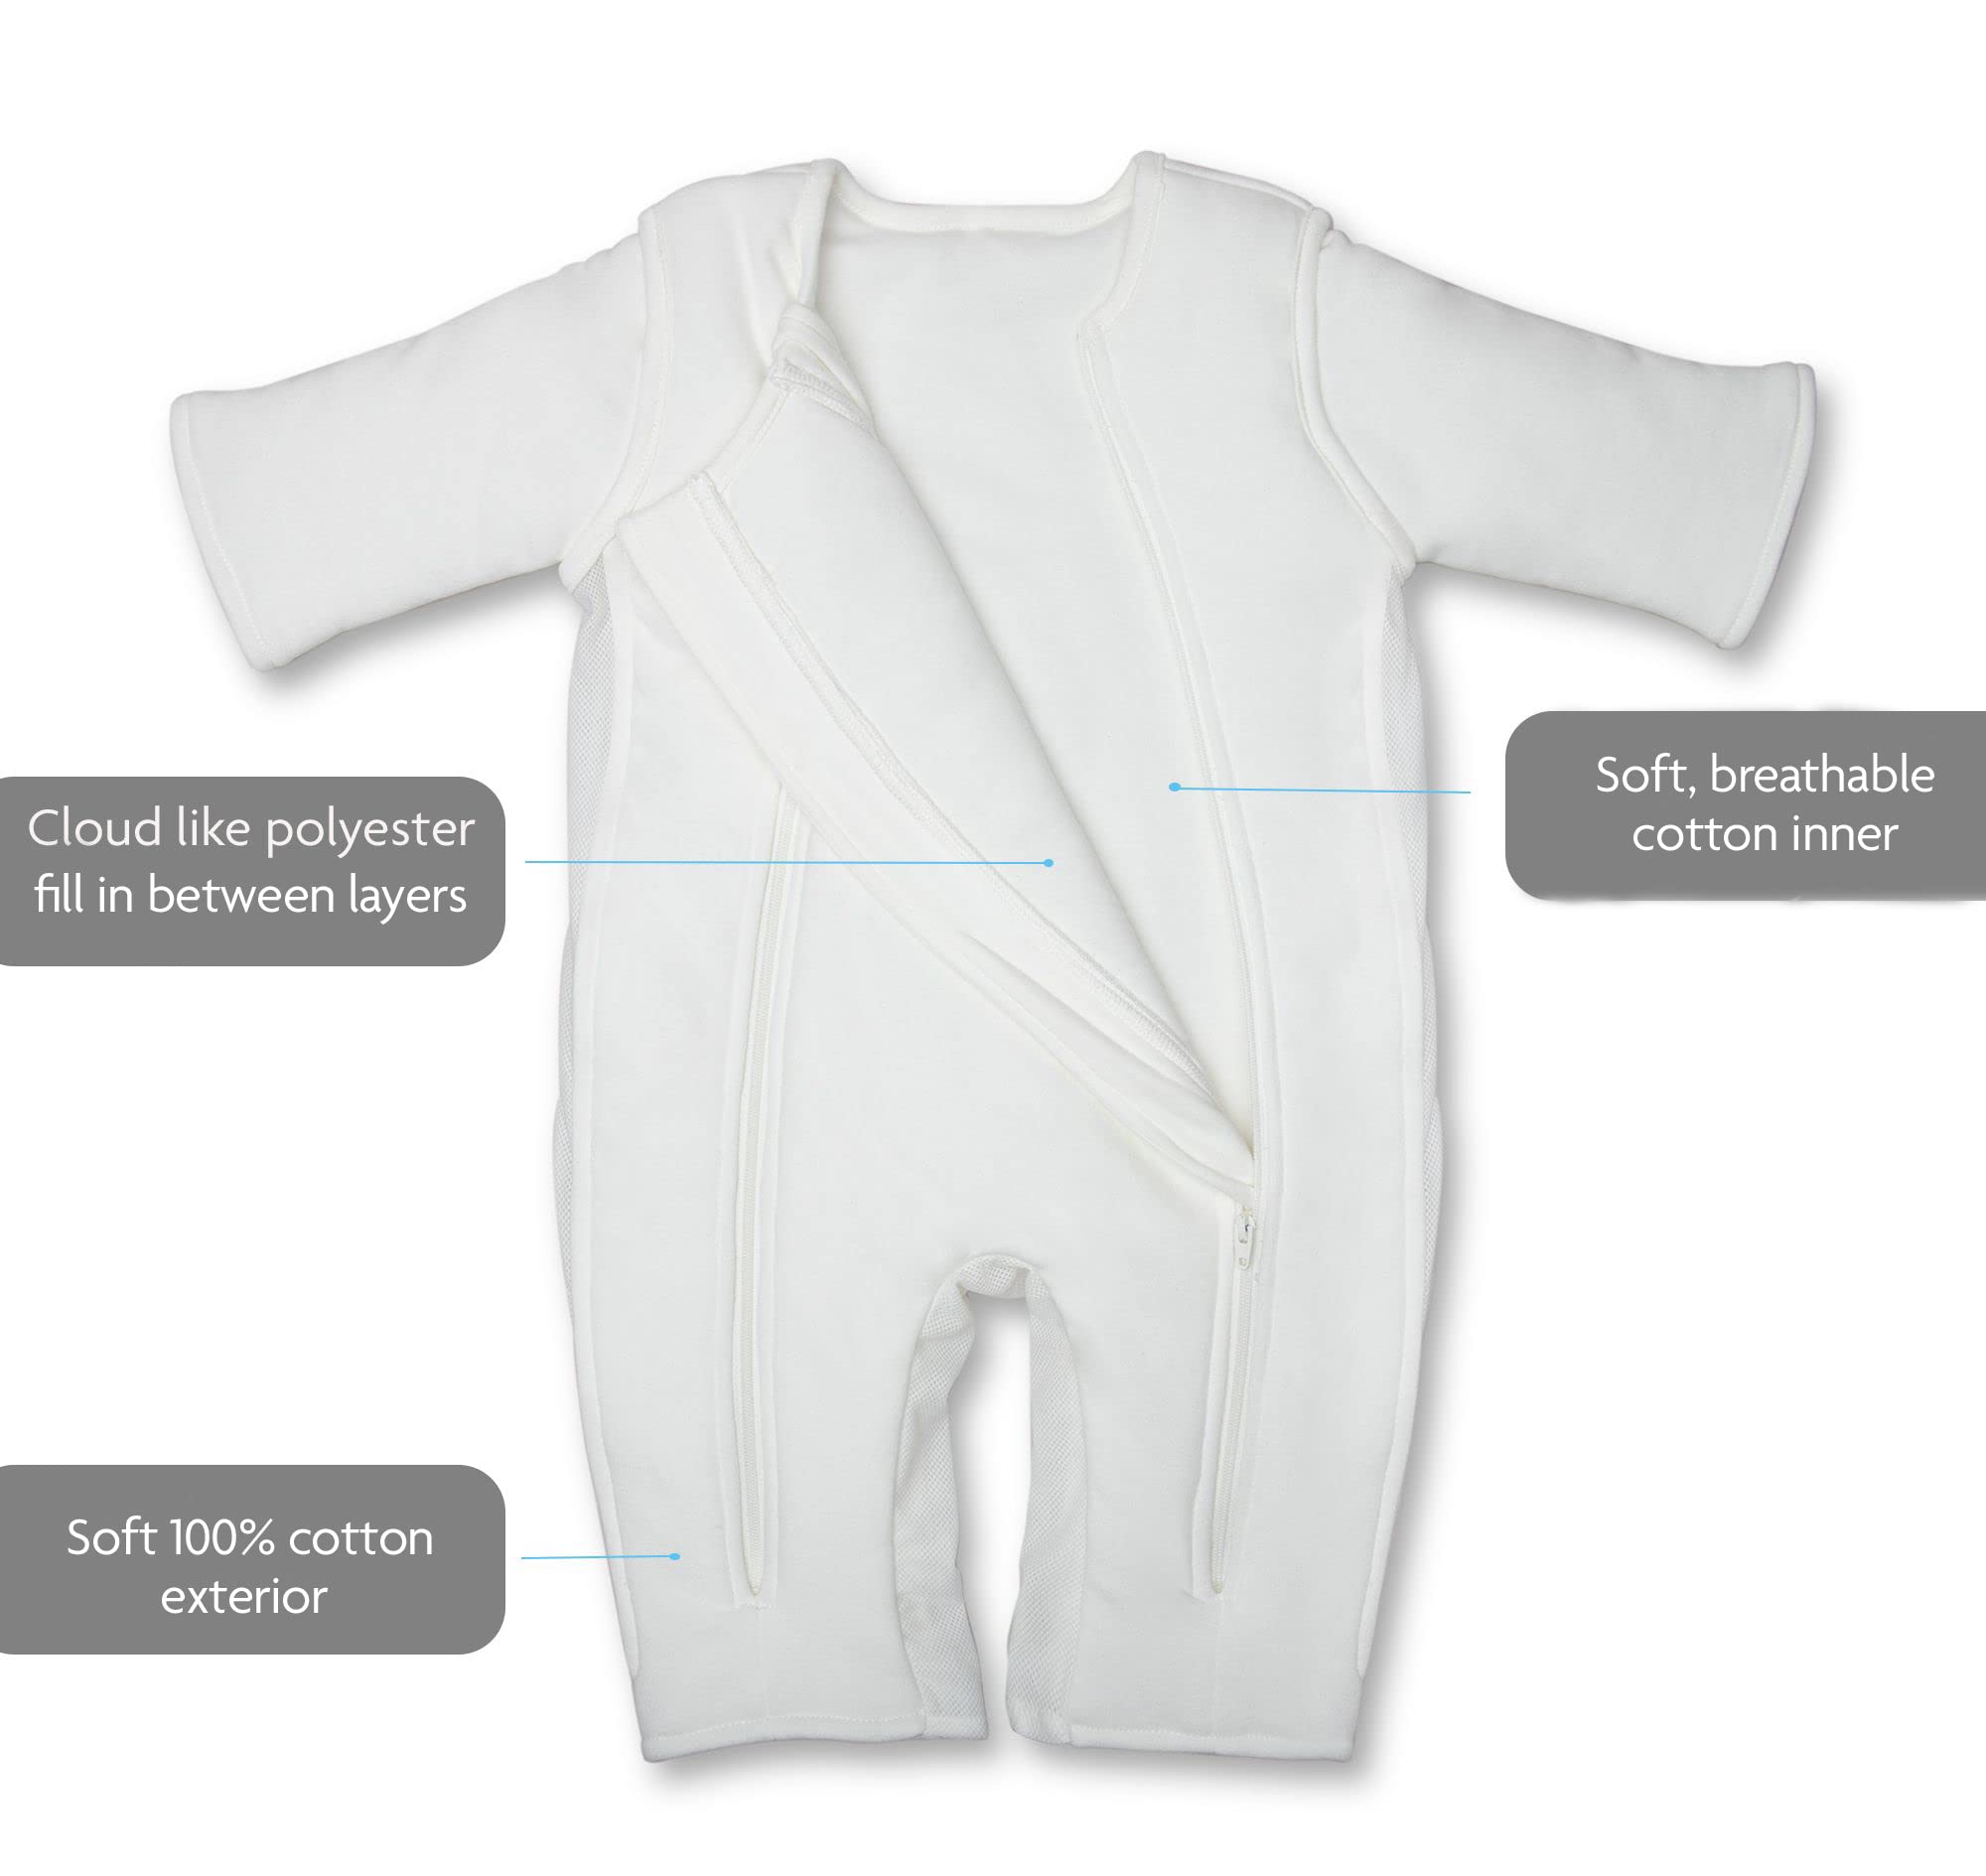 Baby Brezza 2-in-1 Double Zipper Baby Sleepsuit - Unique Swaddle Transition Sleepsuit - Breathable with Mesh Panels - Converts from Sleepsuit to Sleep Vest, 3-6 Months, Cream